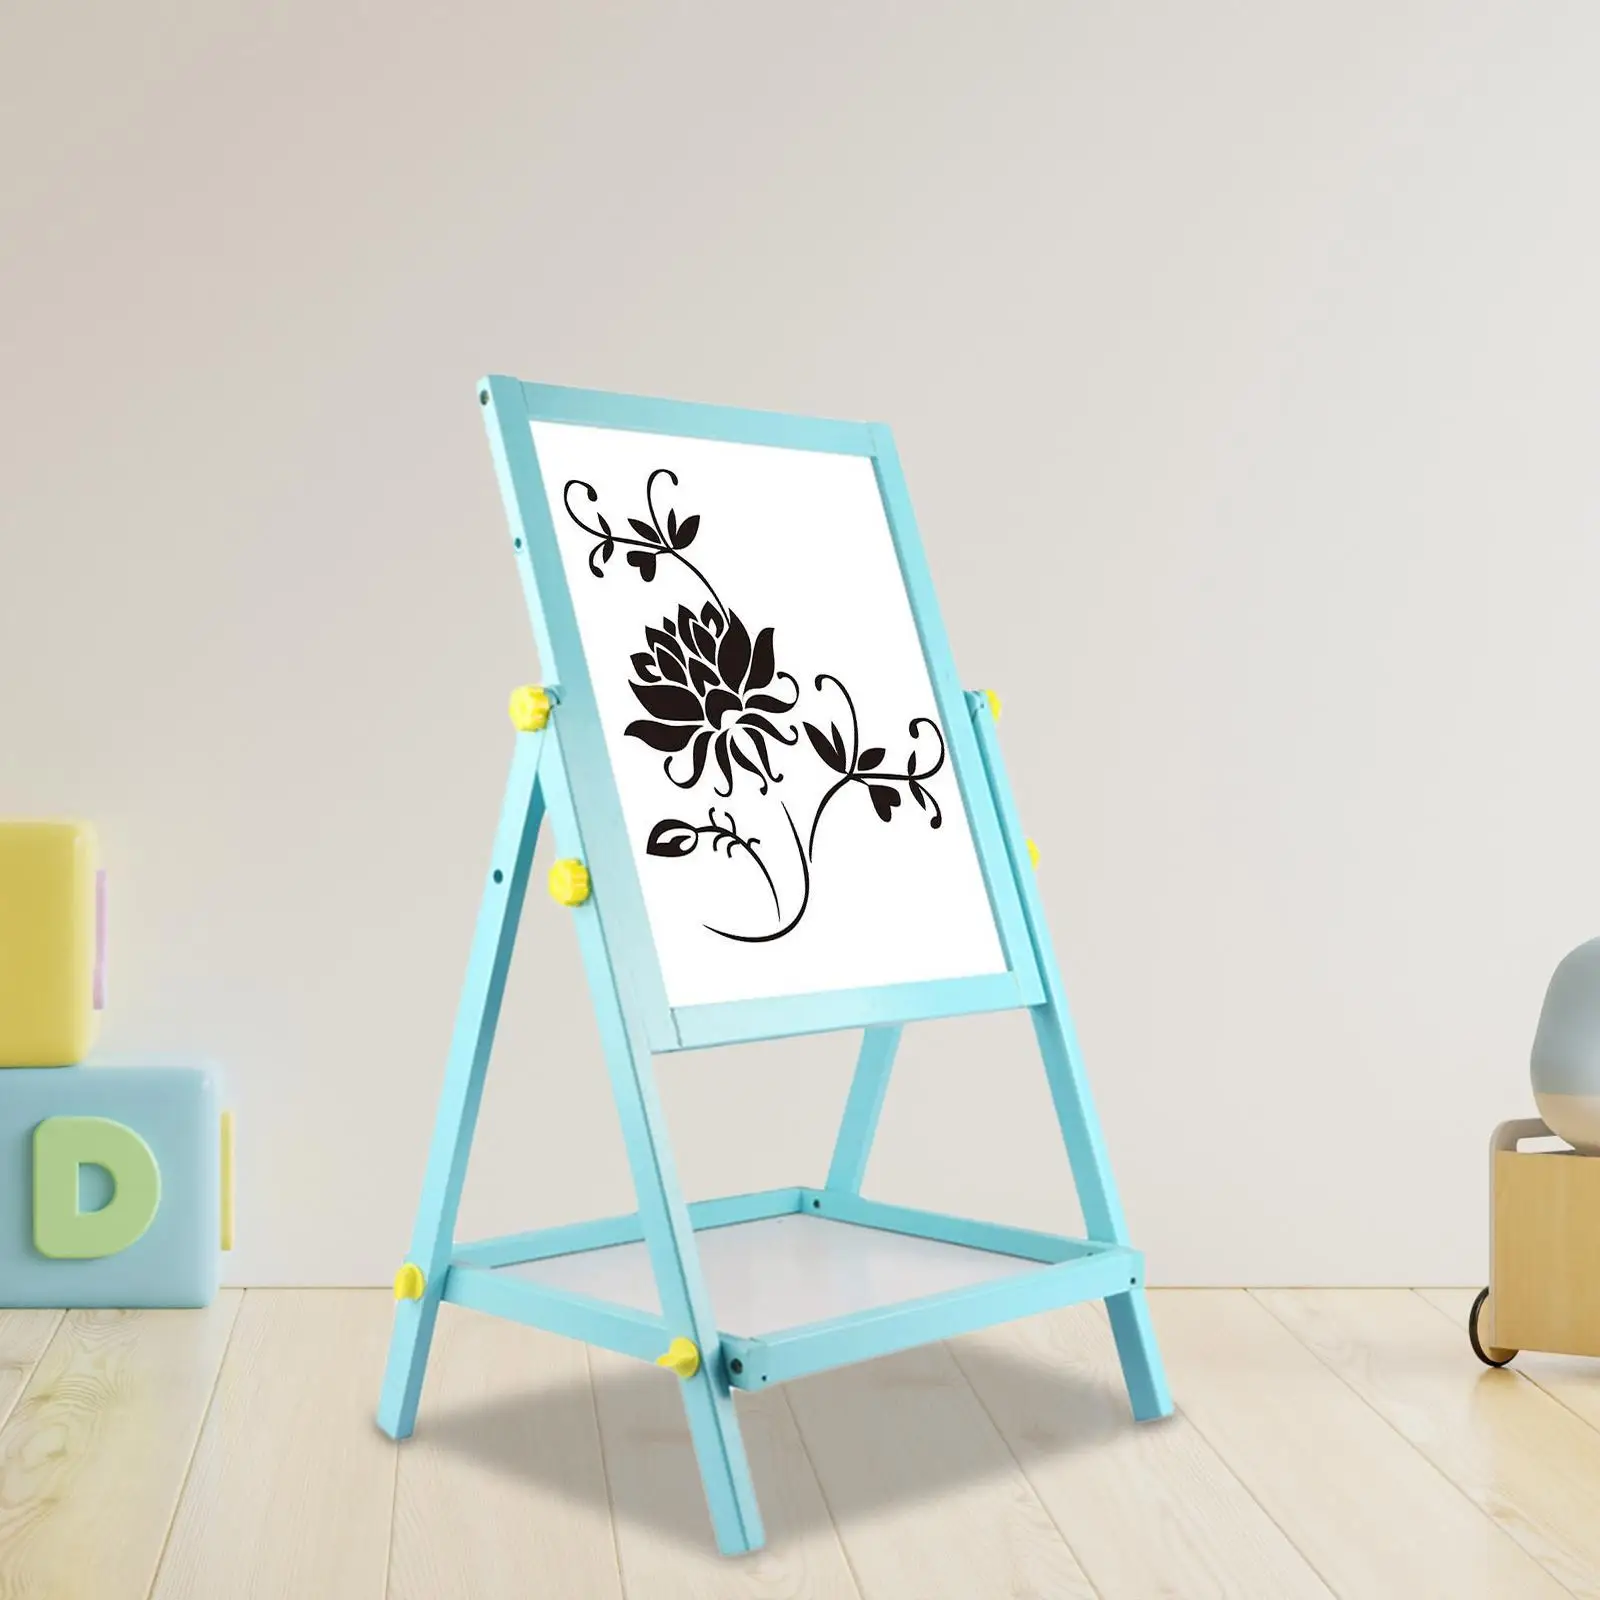 Art Easel Double Sided Whiteboard Chalkboard Painting Accessories Teaching Aid 2 in 1 Easel Double Sided Easel for Kids Children